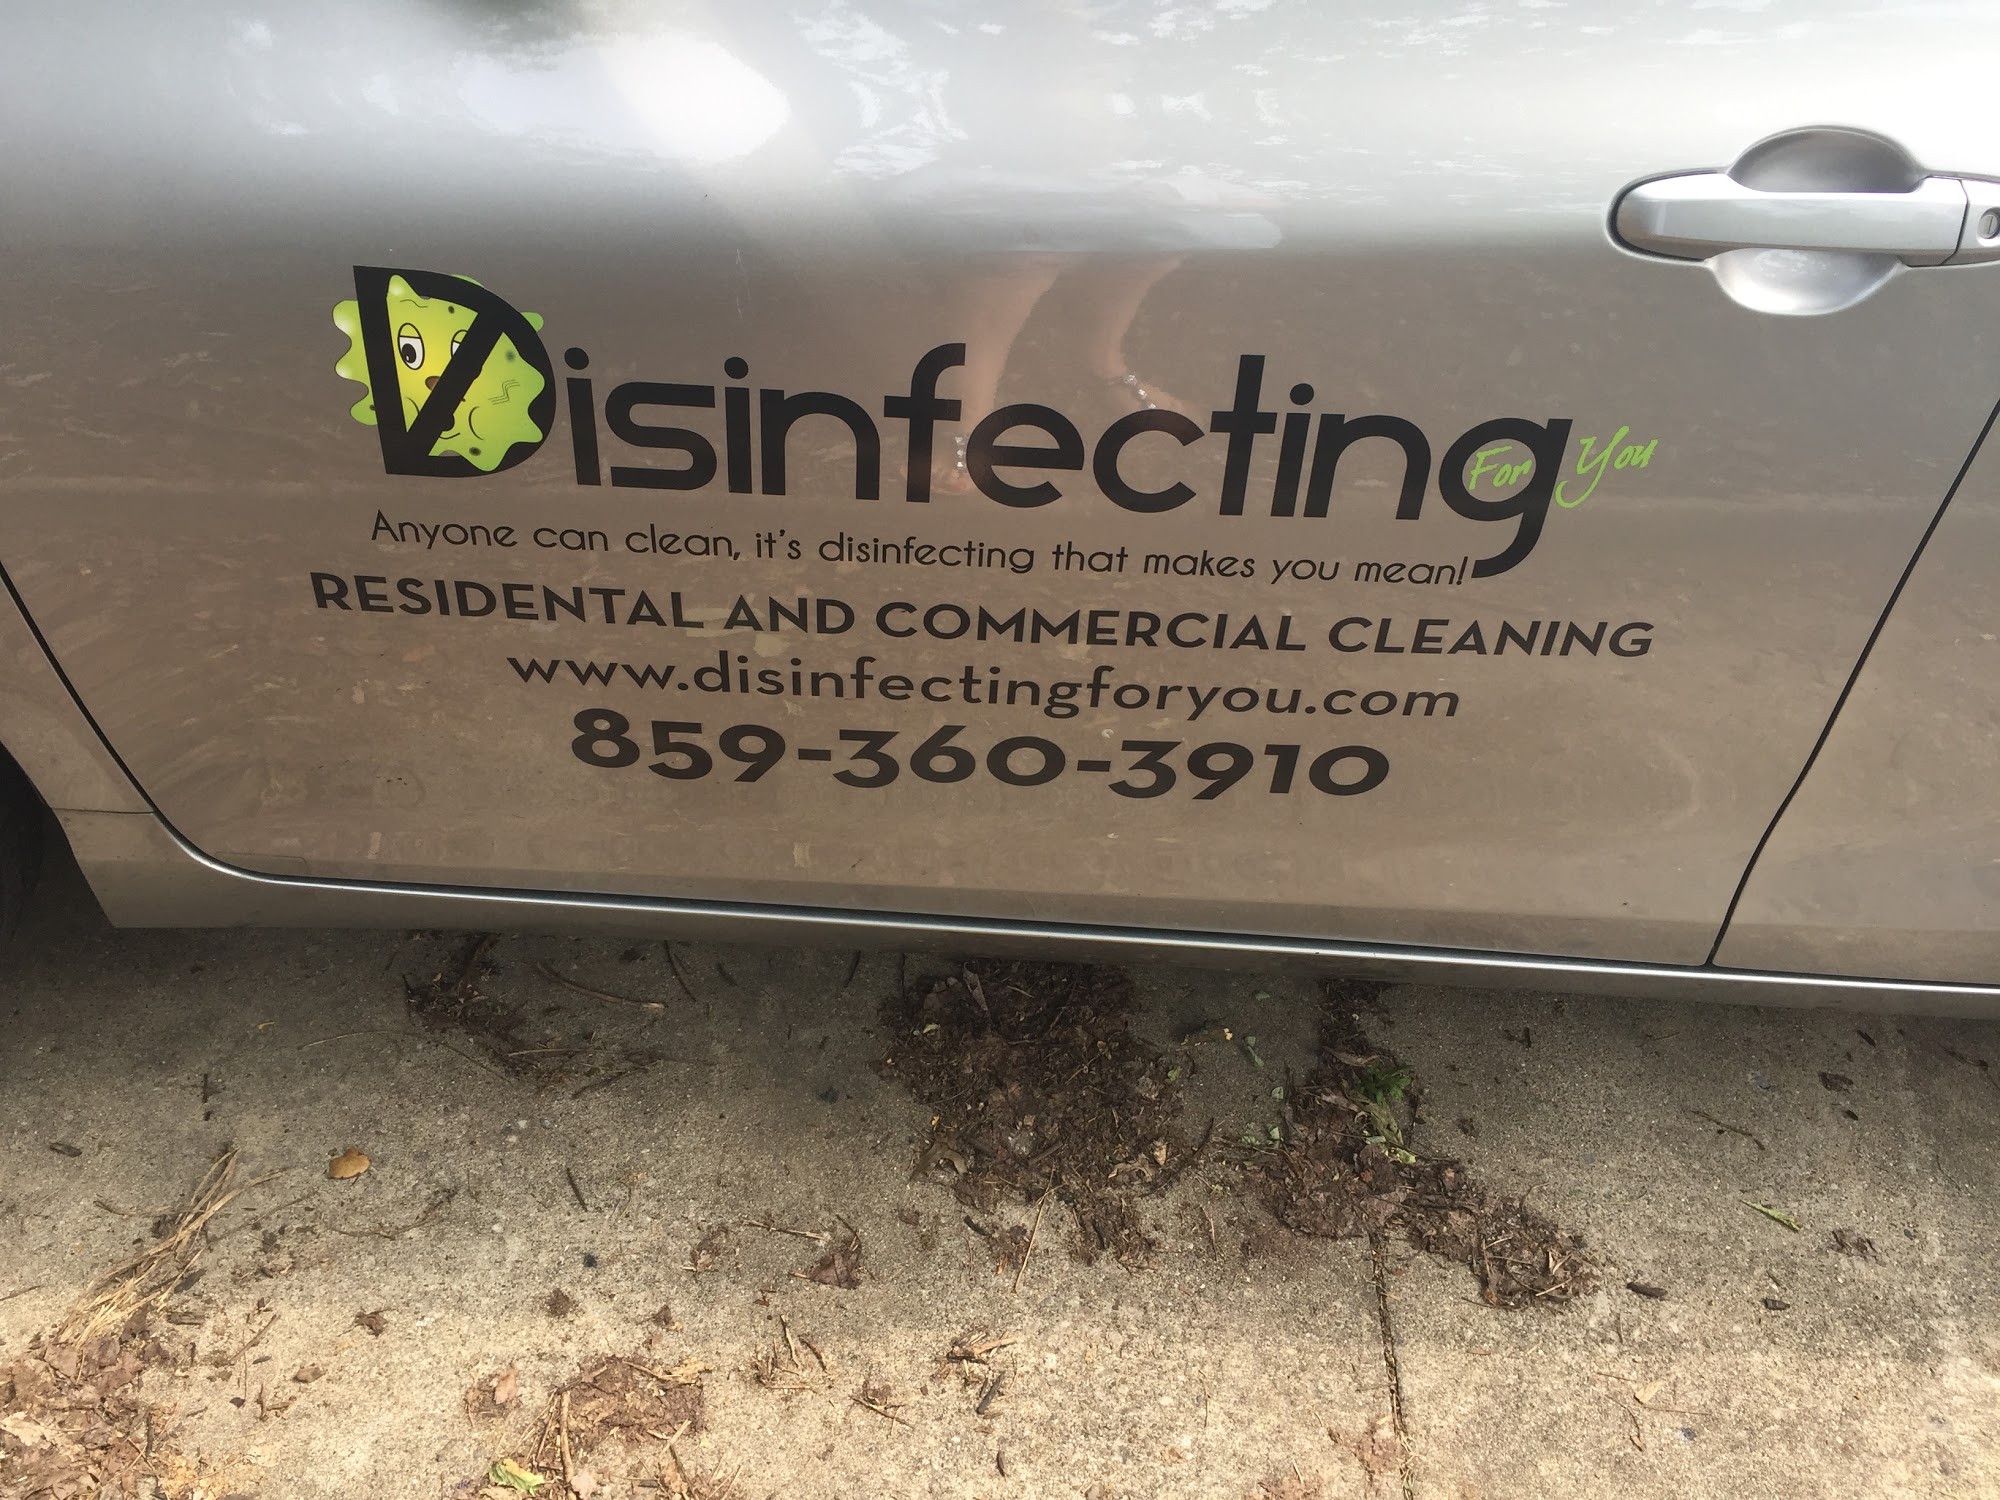 Disinfecting For You, Inc.